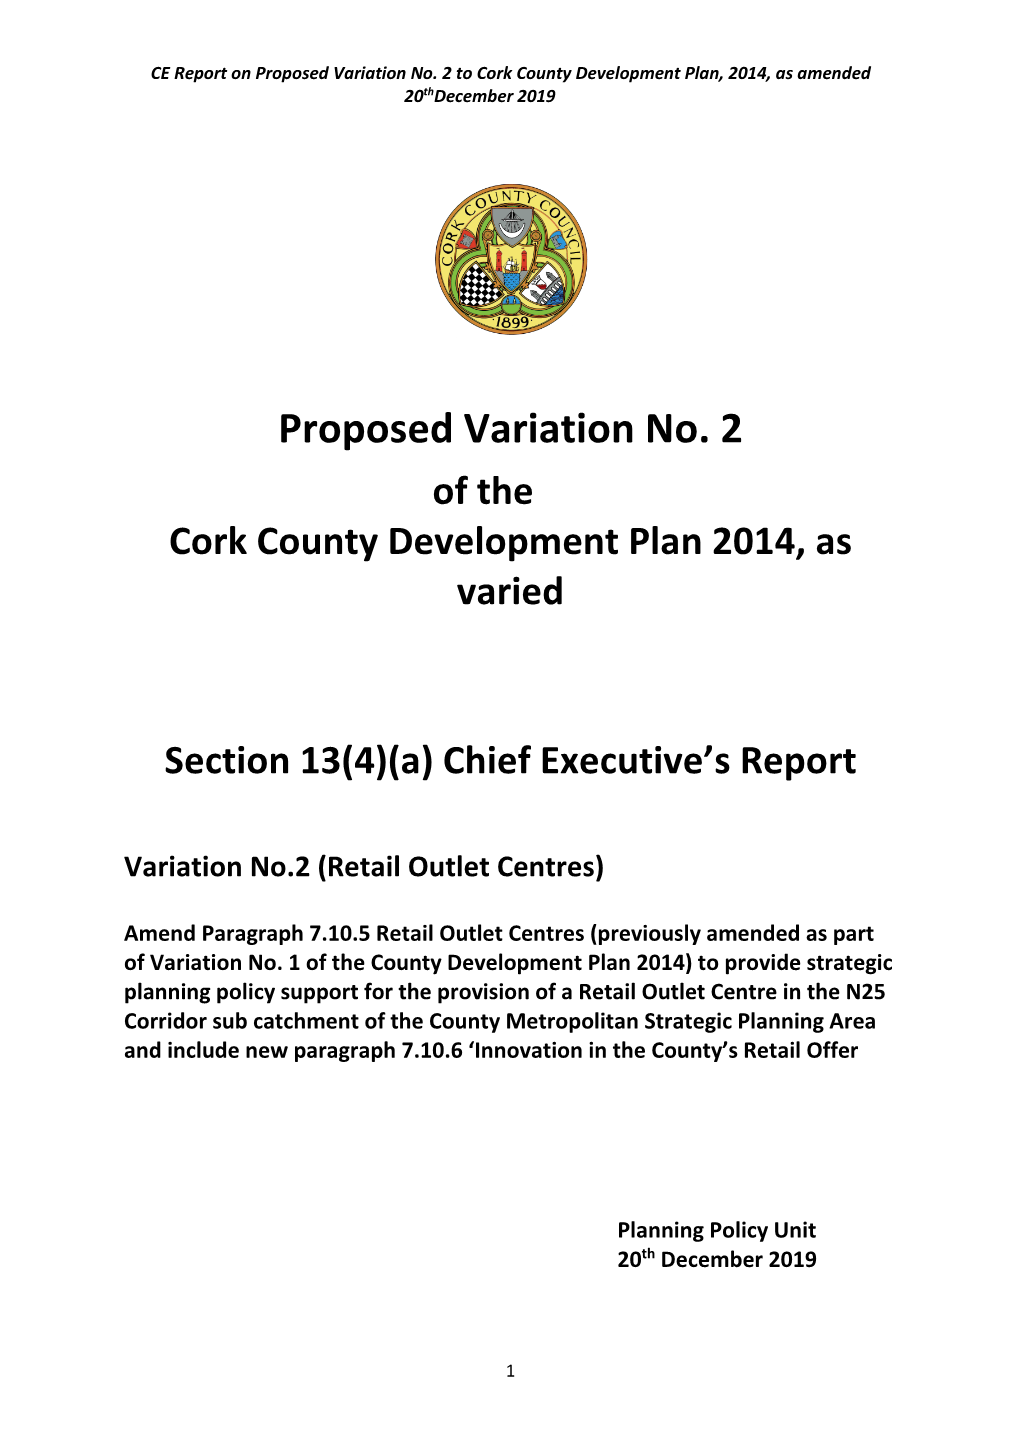 CE Report on Proposed Variation No. 2 Cork CDP 2014 Retail Outlet Centre